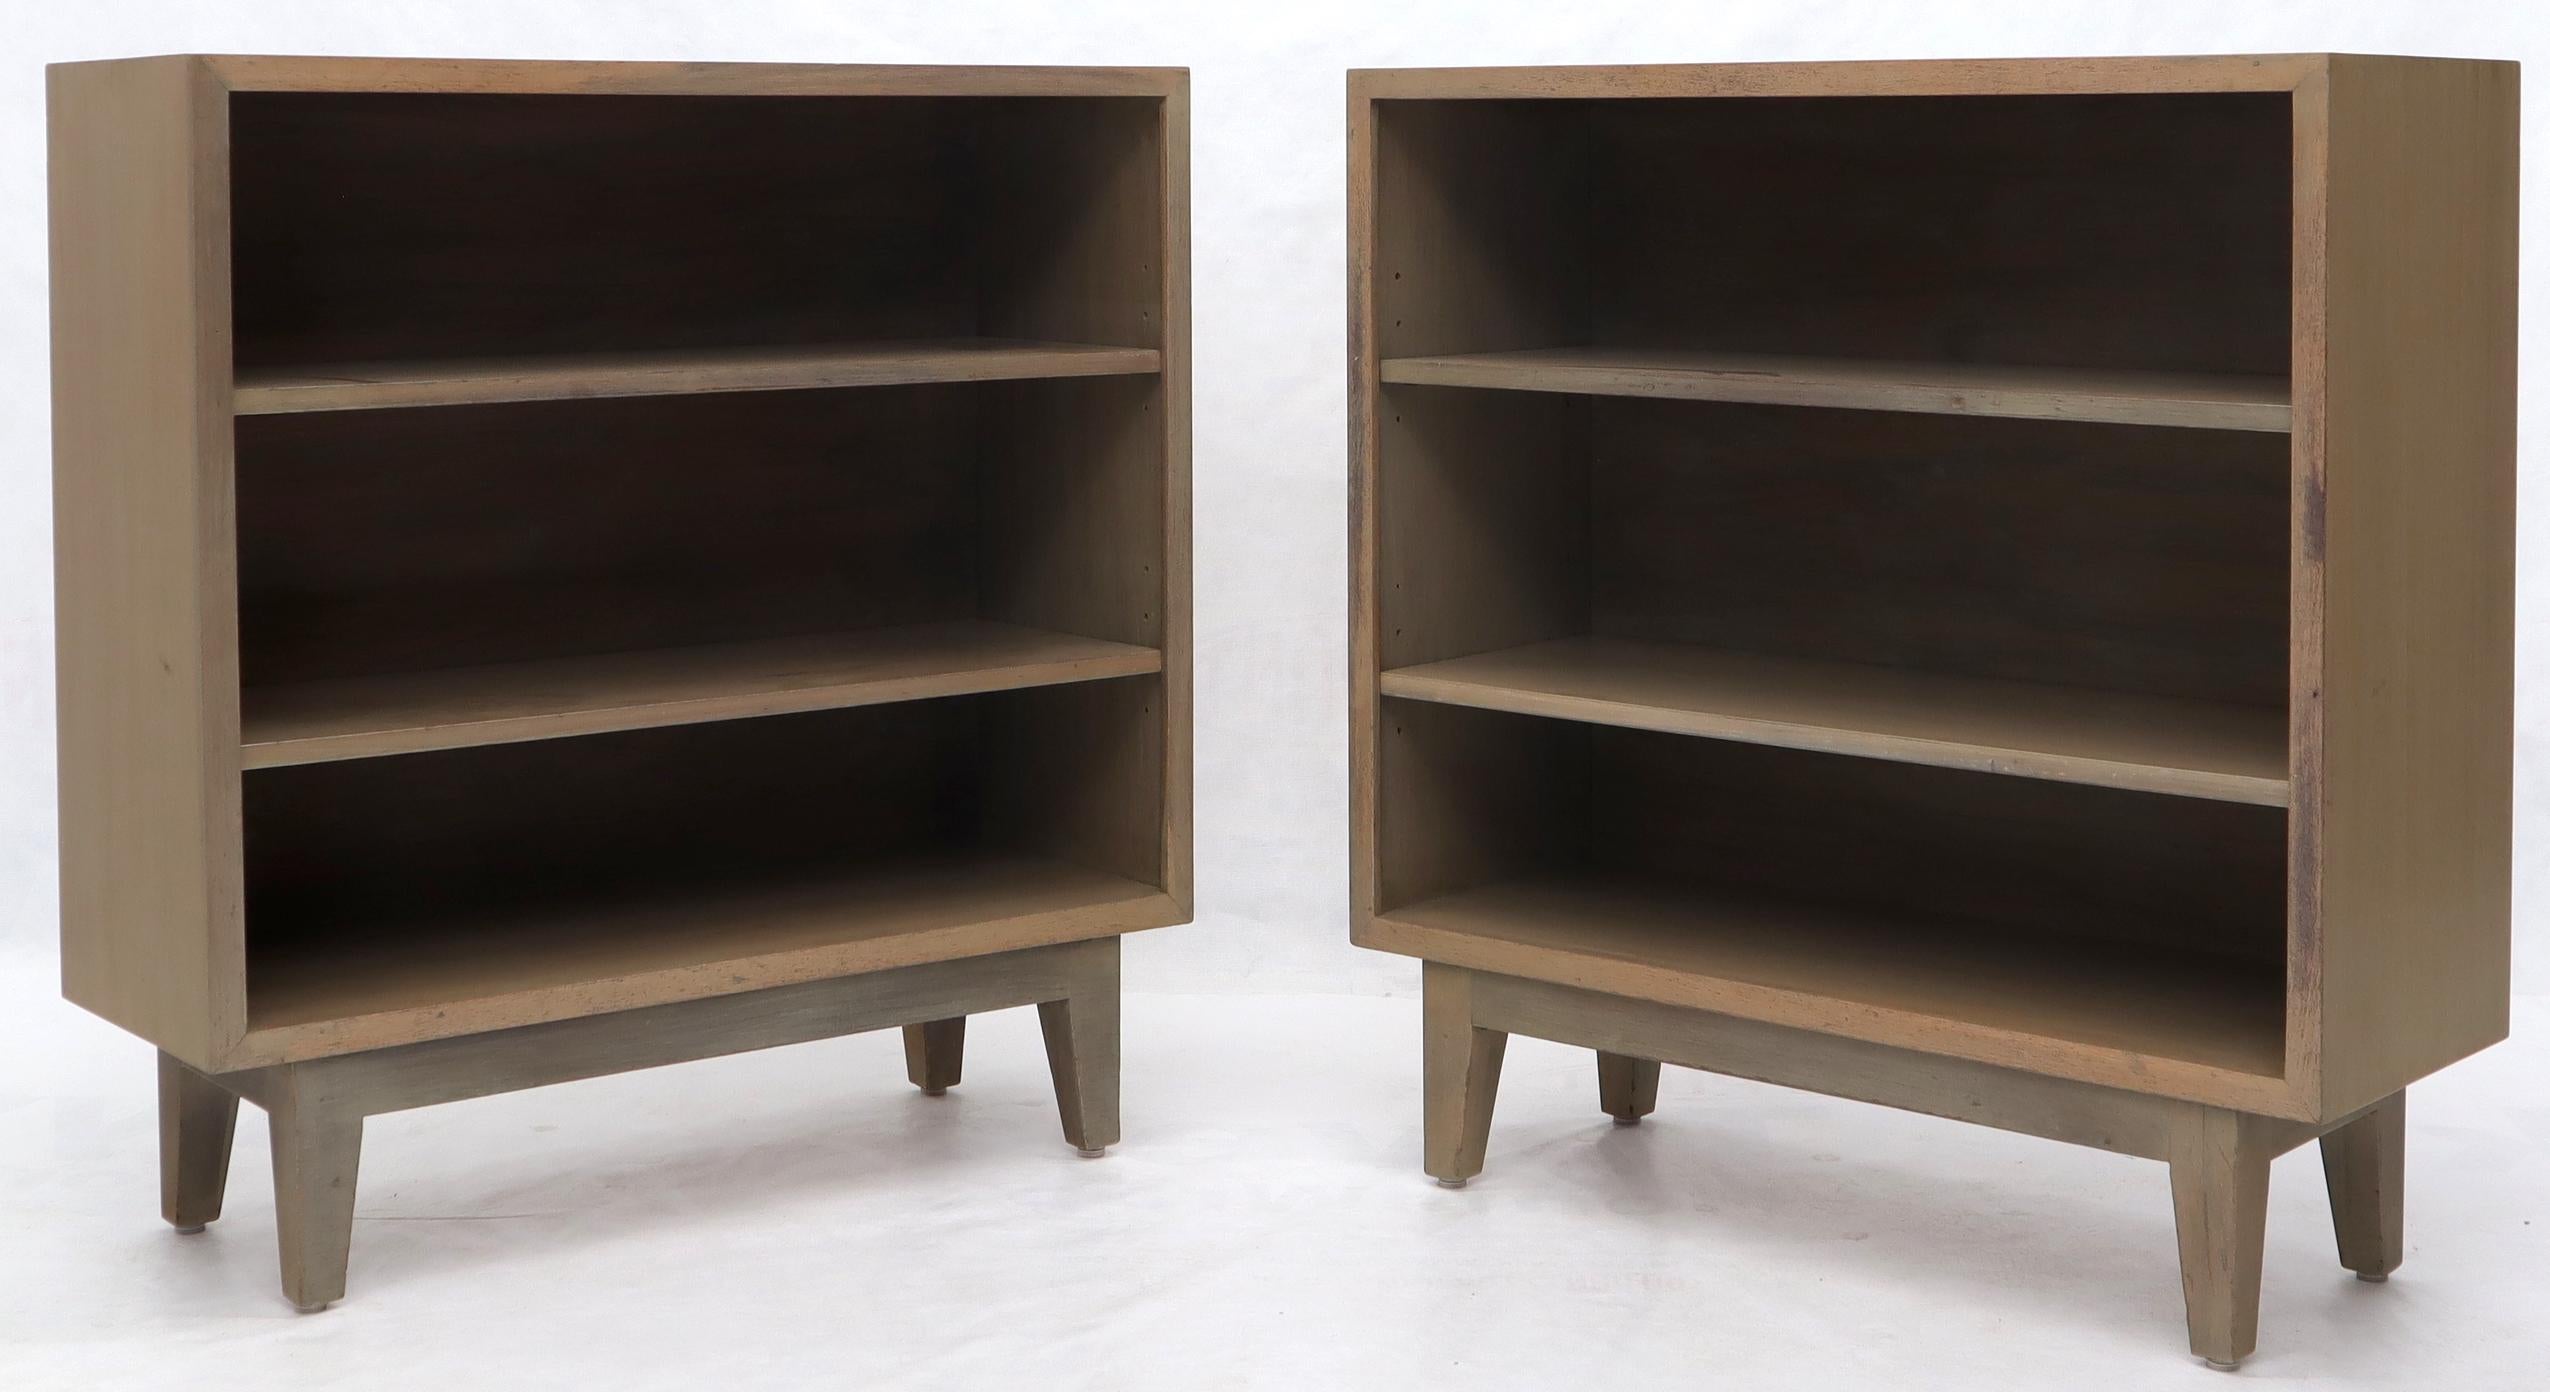 Pair of Mid-Century Modern vintage solid mahogany bookcases in white wash finish.
  